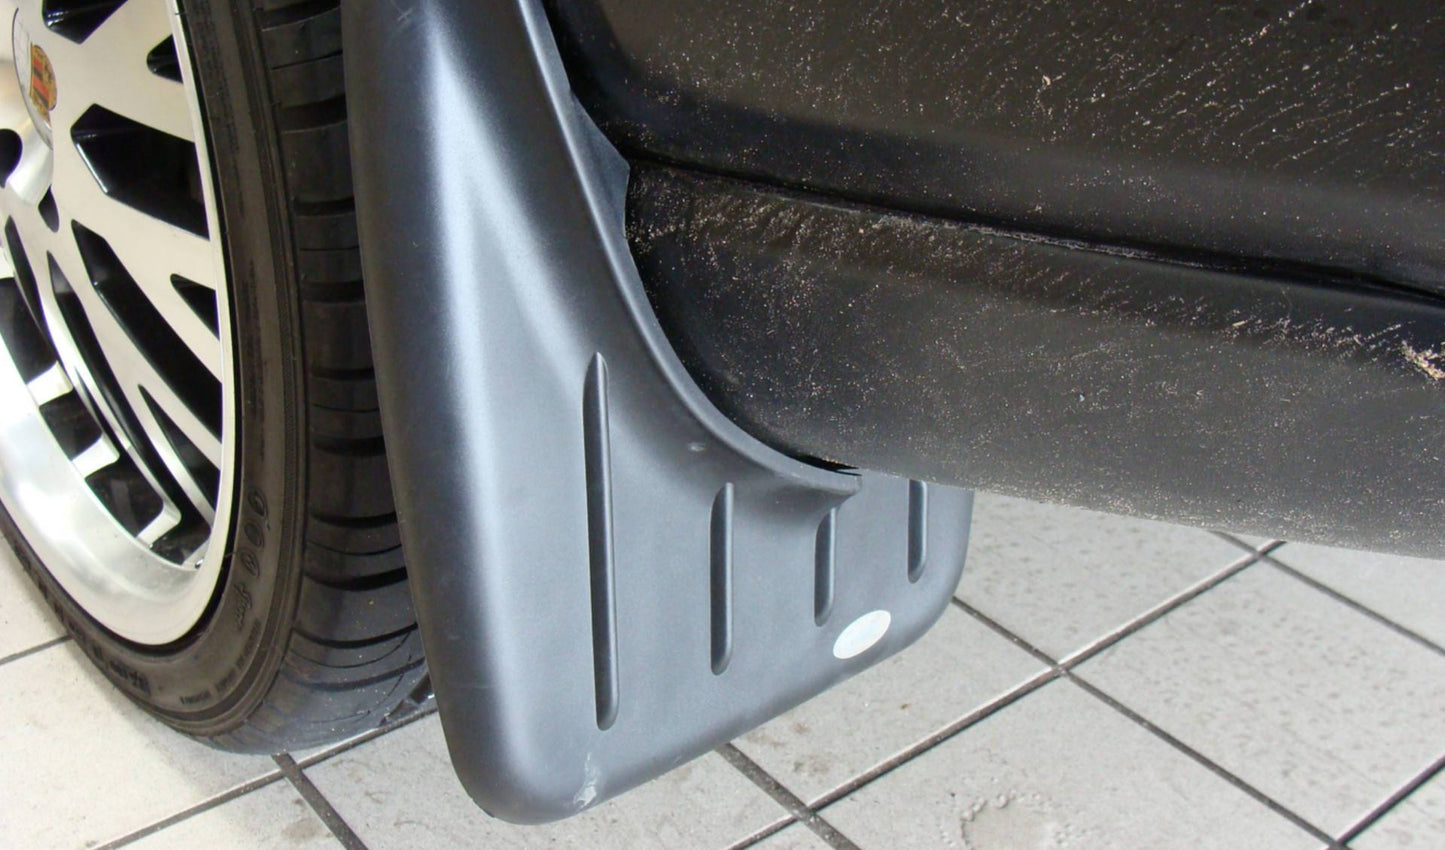 OE Style Mud Flaps Splash Guards for Porsche Cayenne 2007-2010 -  - sold by Direct4x4